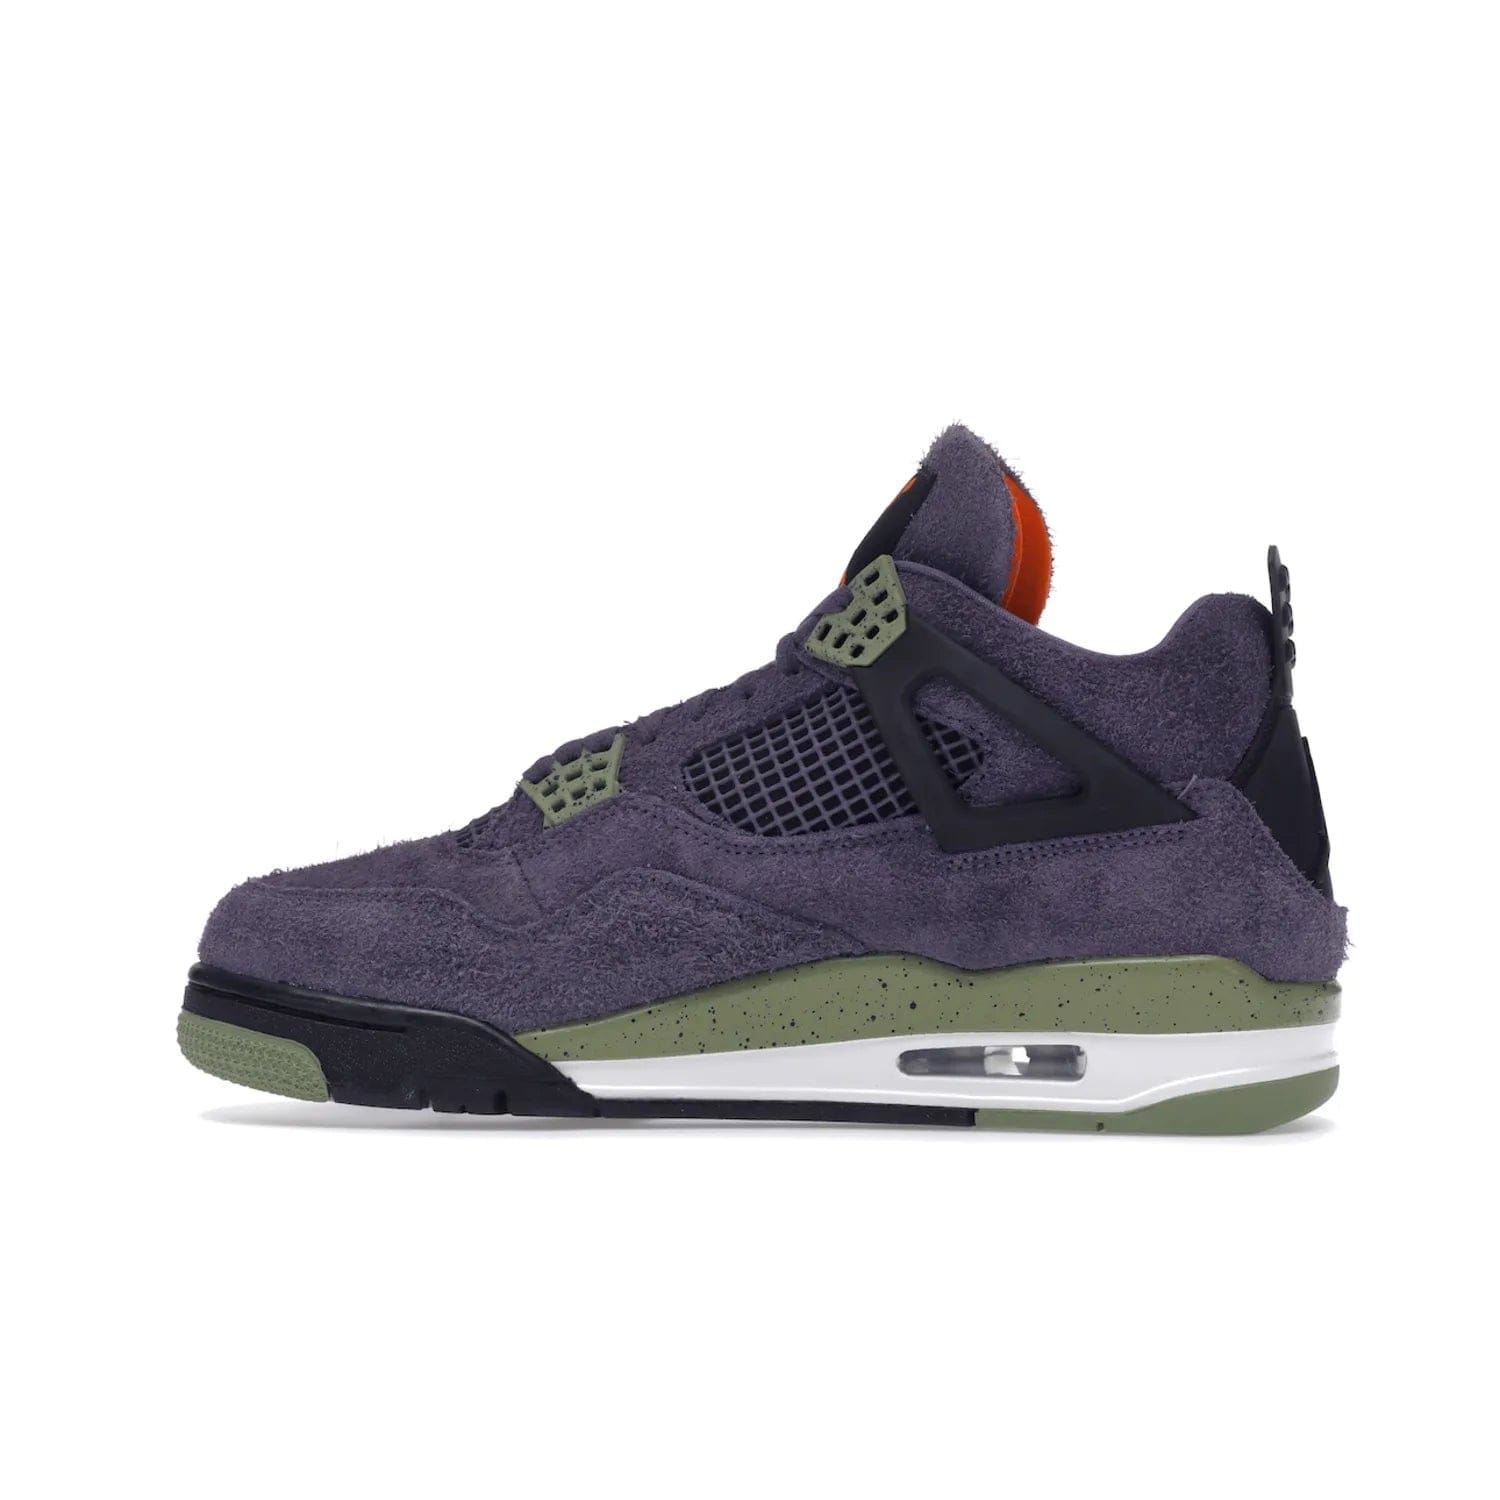 Jordan 4 Retro Canyon Purple (Women's) - Image 20 - Only at www.BallersClubKickz.com - New Air Jordan 4 Retro Canyon Purple W sneaker features shaggy purple suede, lime highlights & safety orange Jumpman branding. Classic ankle-hugging silhouette with modern colors released 15/10/2022.